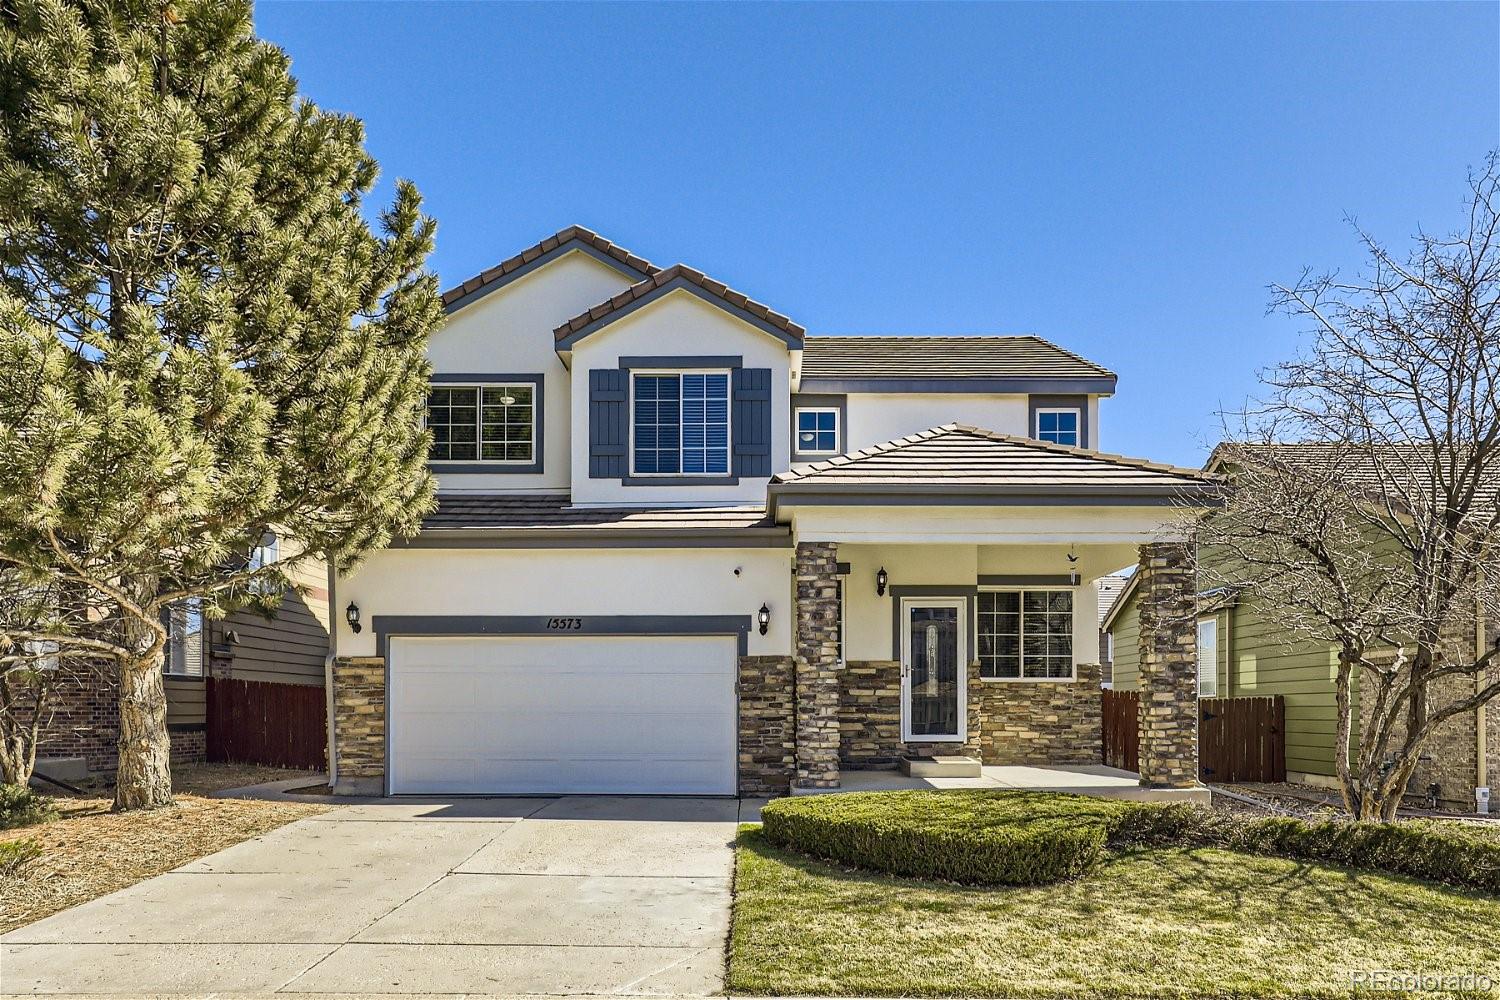 15573 E 96th Way, commerce city MLS: 8162955 Beds: 3 Baths: 3 Price: $520,000